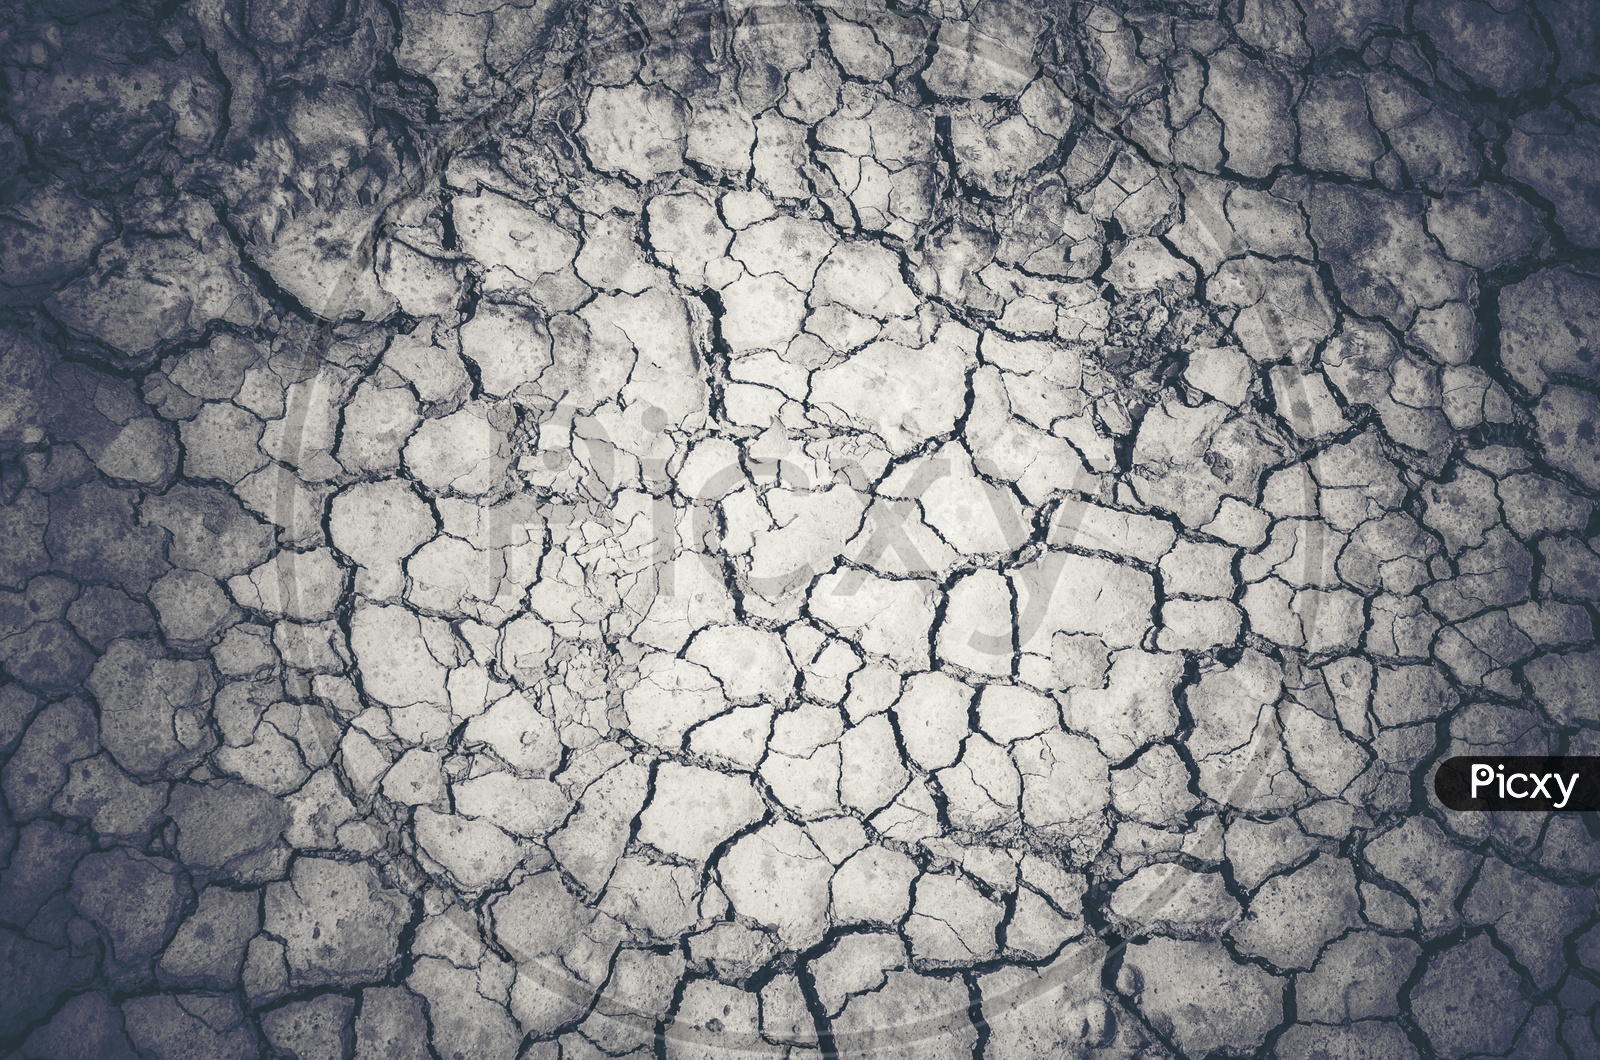 Drought Land With Dry Cracked Soil Texture With B&W Filter